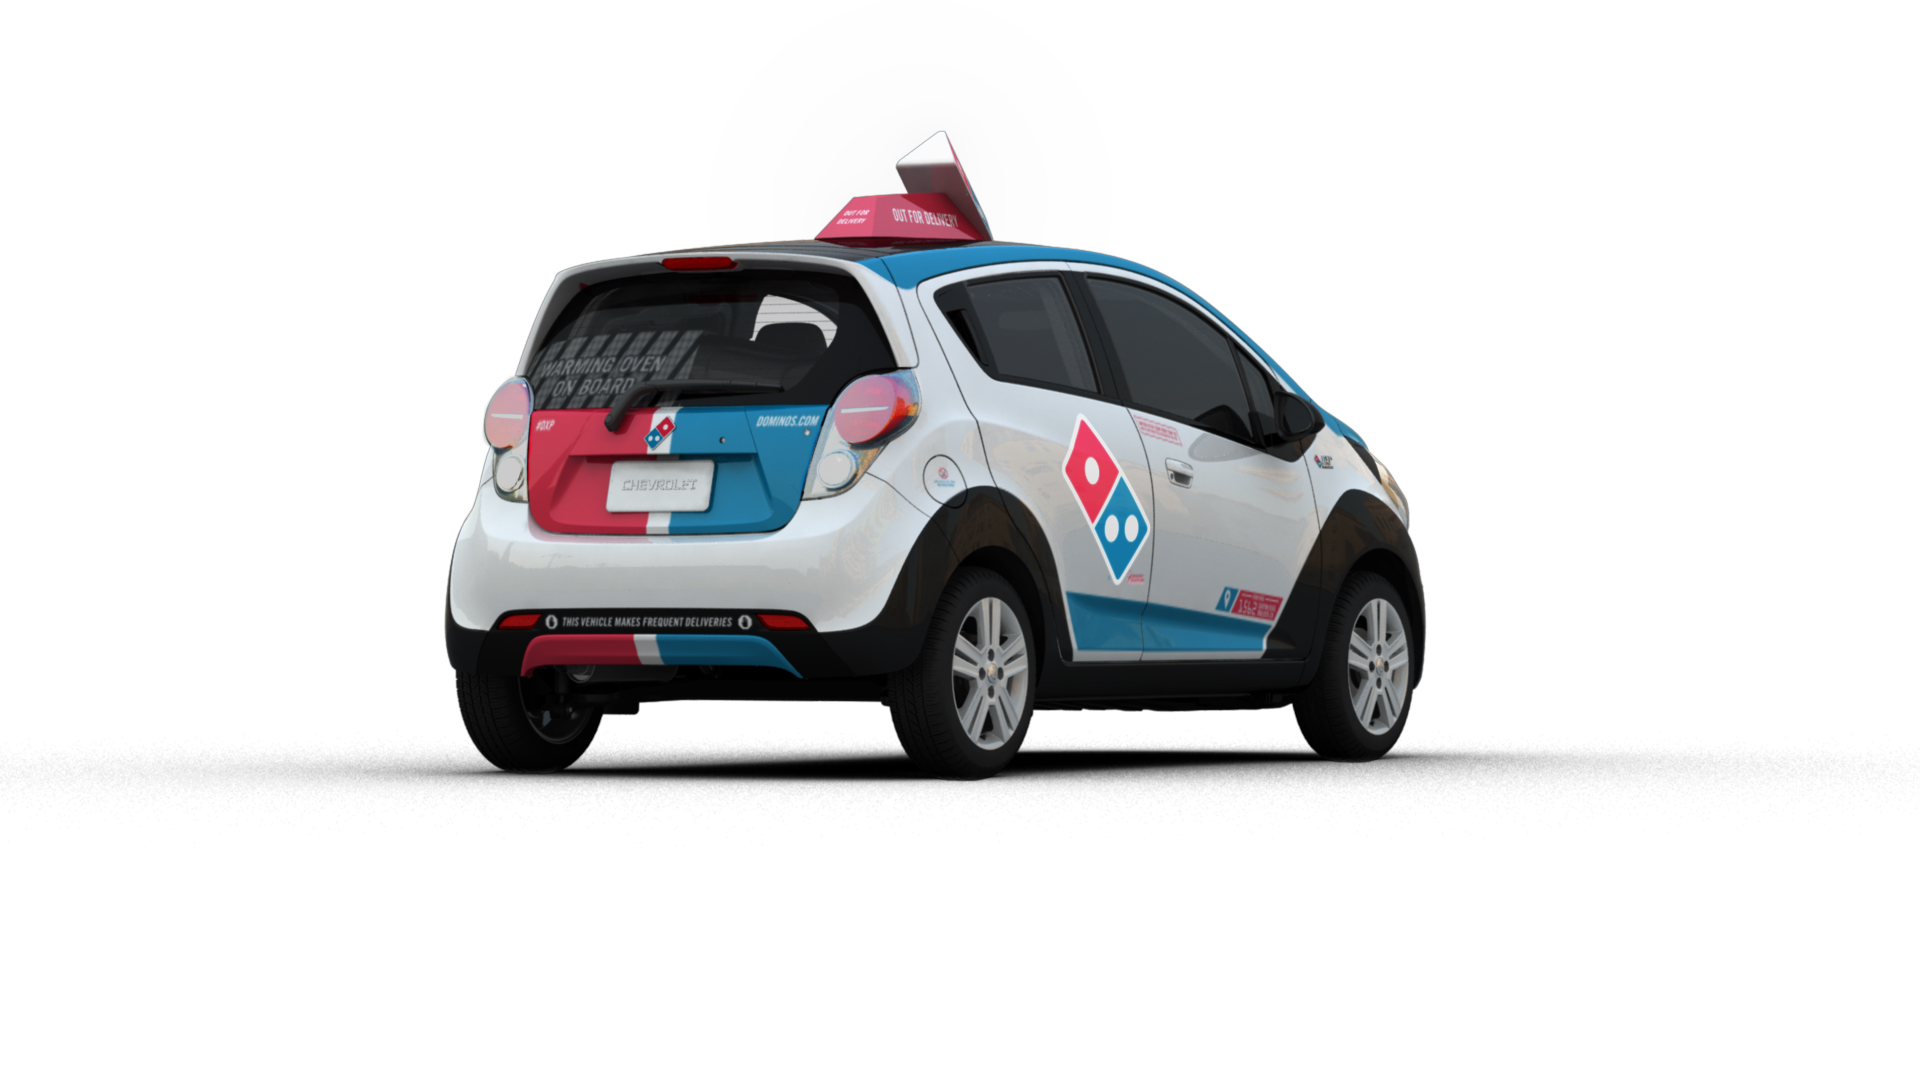 Image result for dominoes pizza delivery